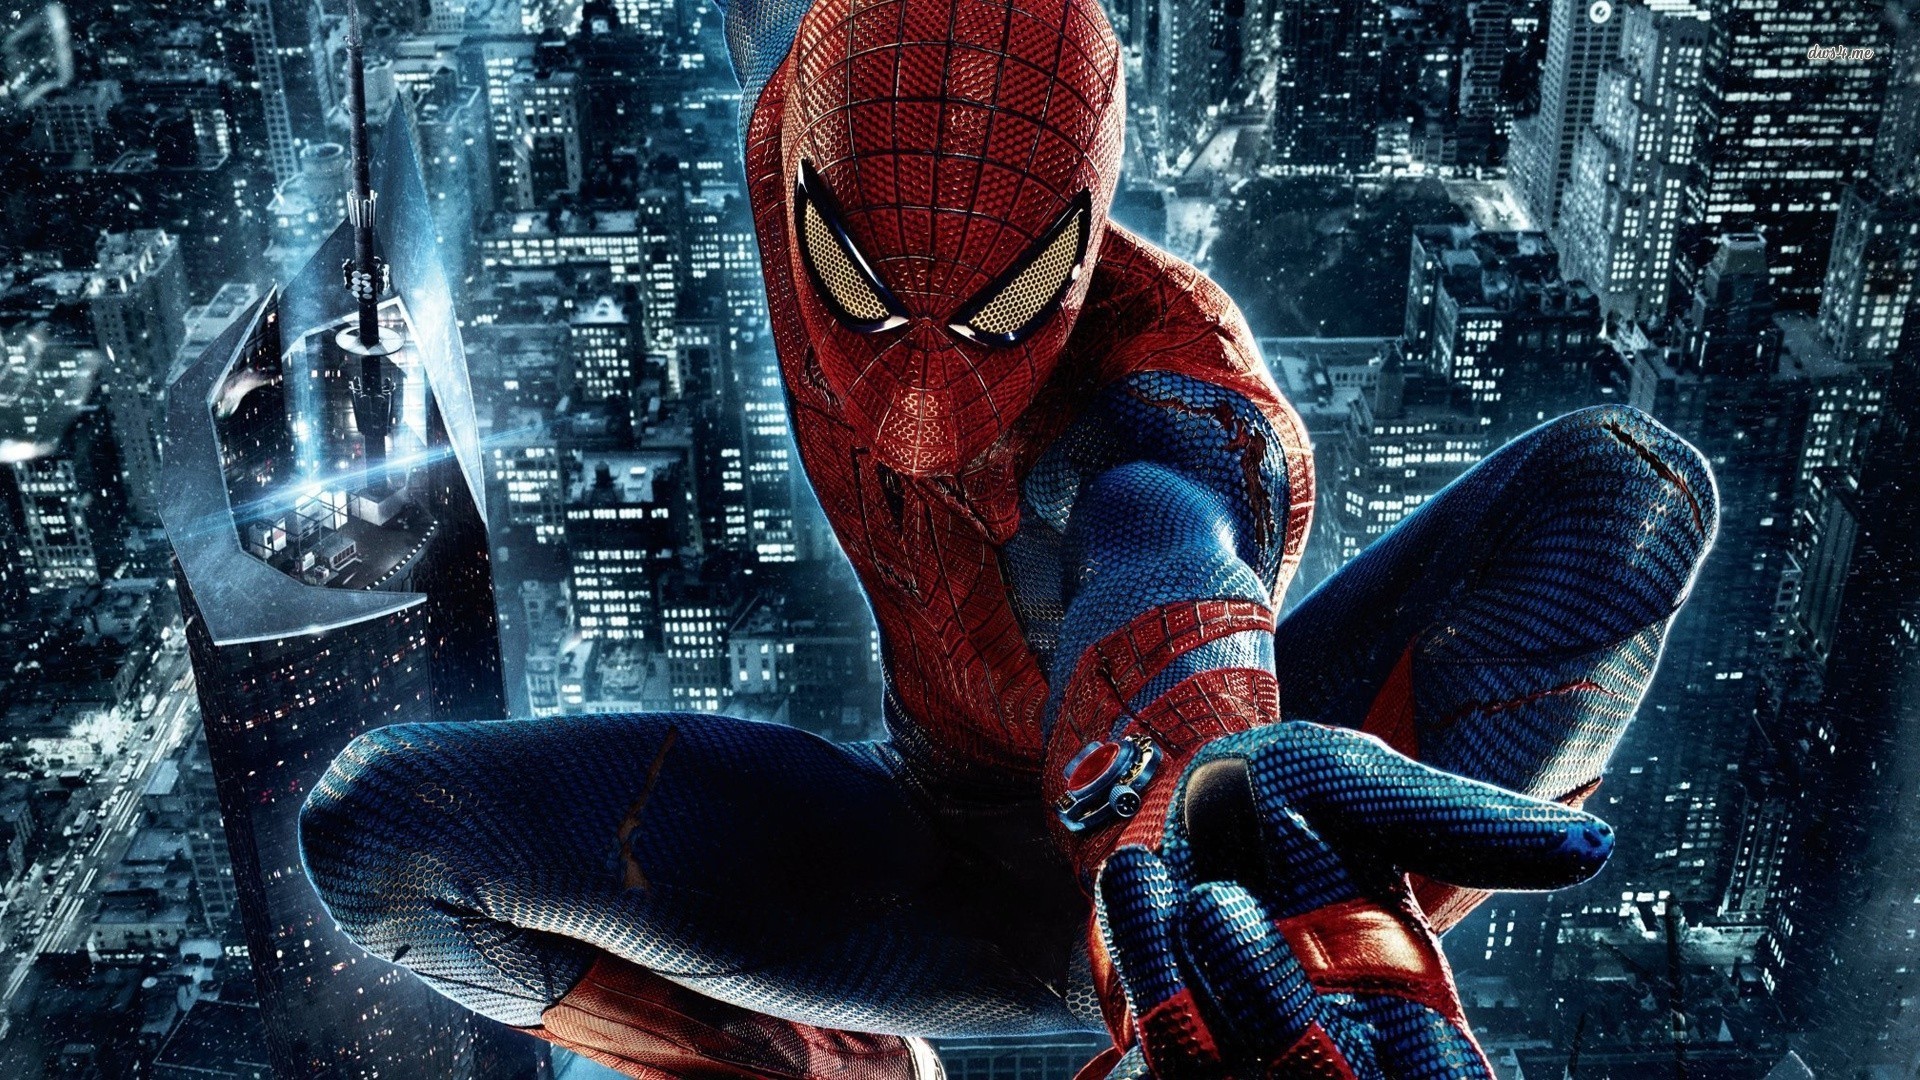 1920x1080 The Spider-Man Films – Part 4 of 5: The Amazing Spider-Man (2012)